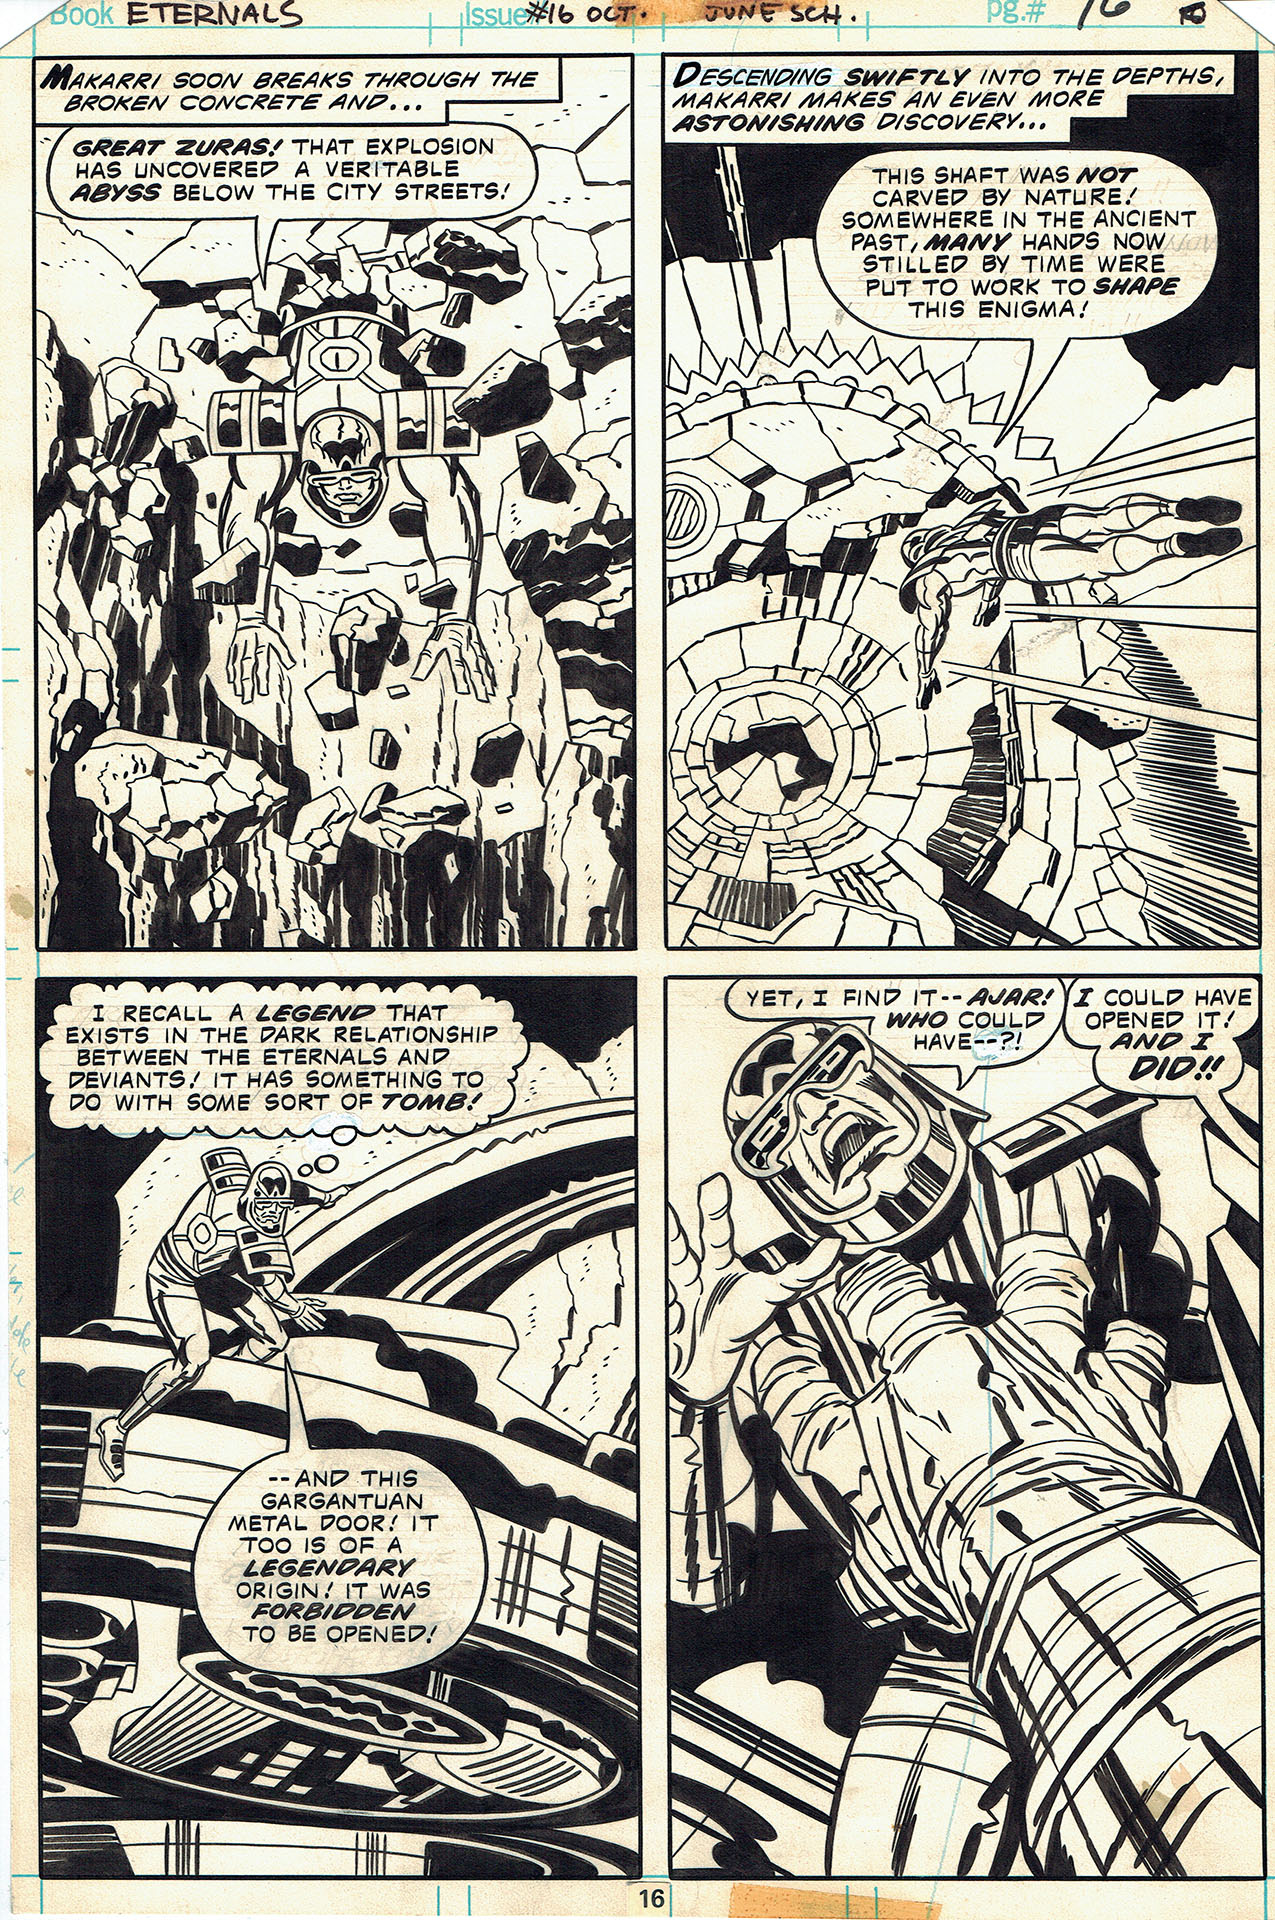 Jack KIRBY | The Eternals — Issue 16 — Page 10